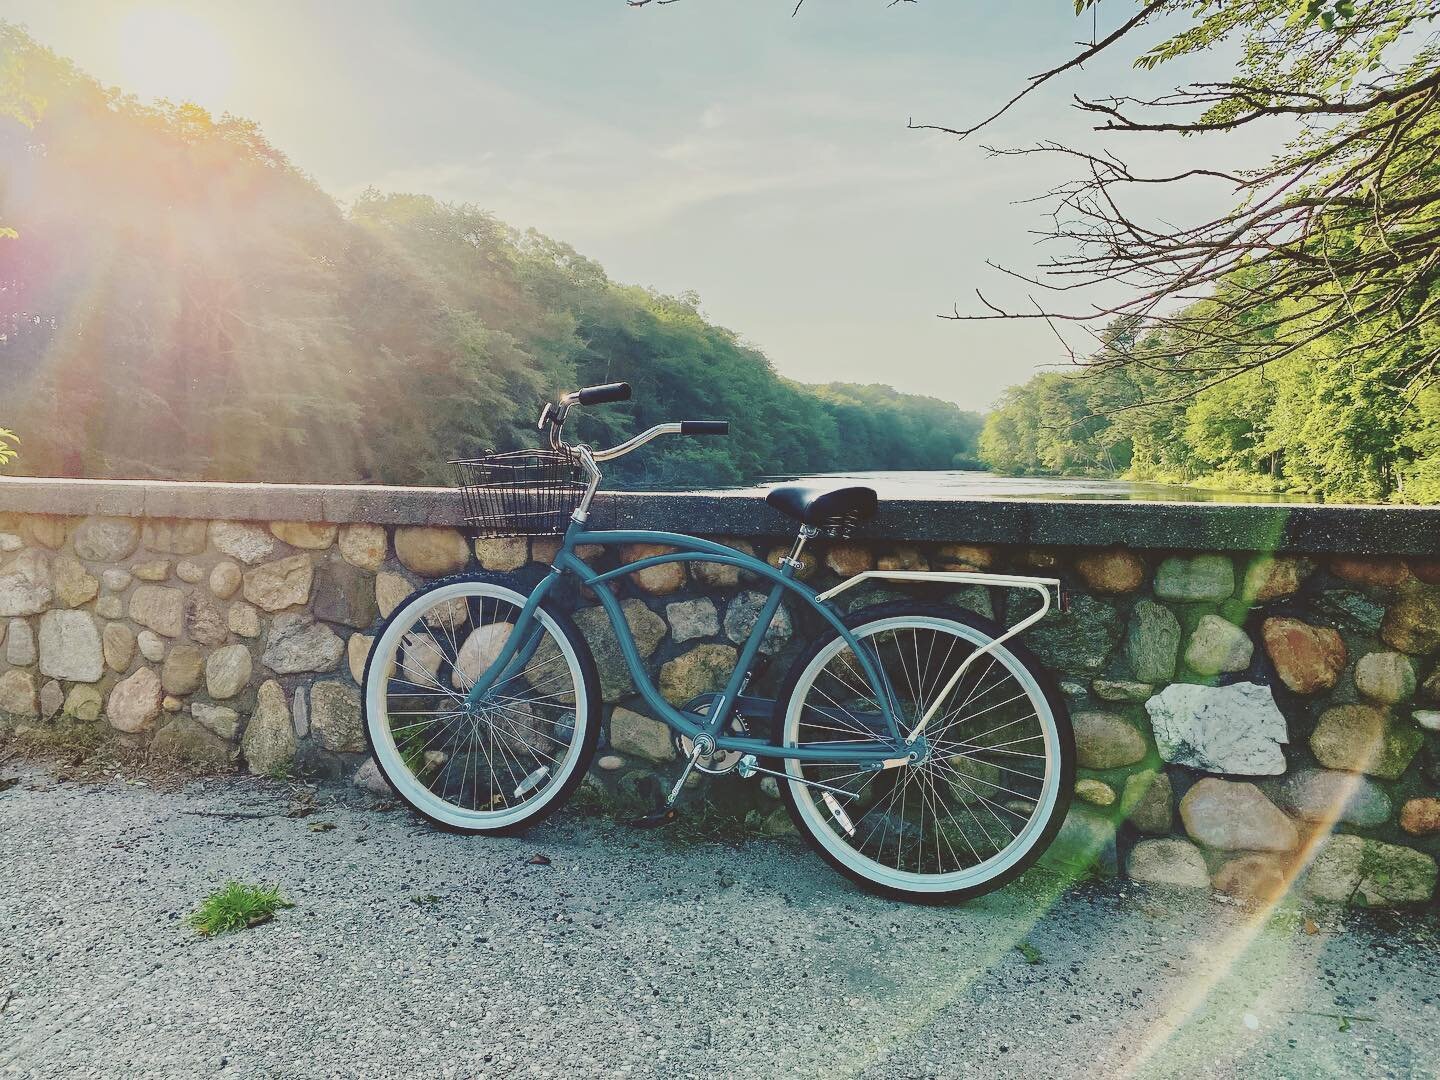 Happy Friday! Where are you riding to this weekend?  #localspokes #westhampton #westhamptonbeach #hamptons #bikerentals